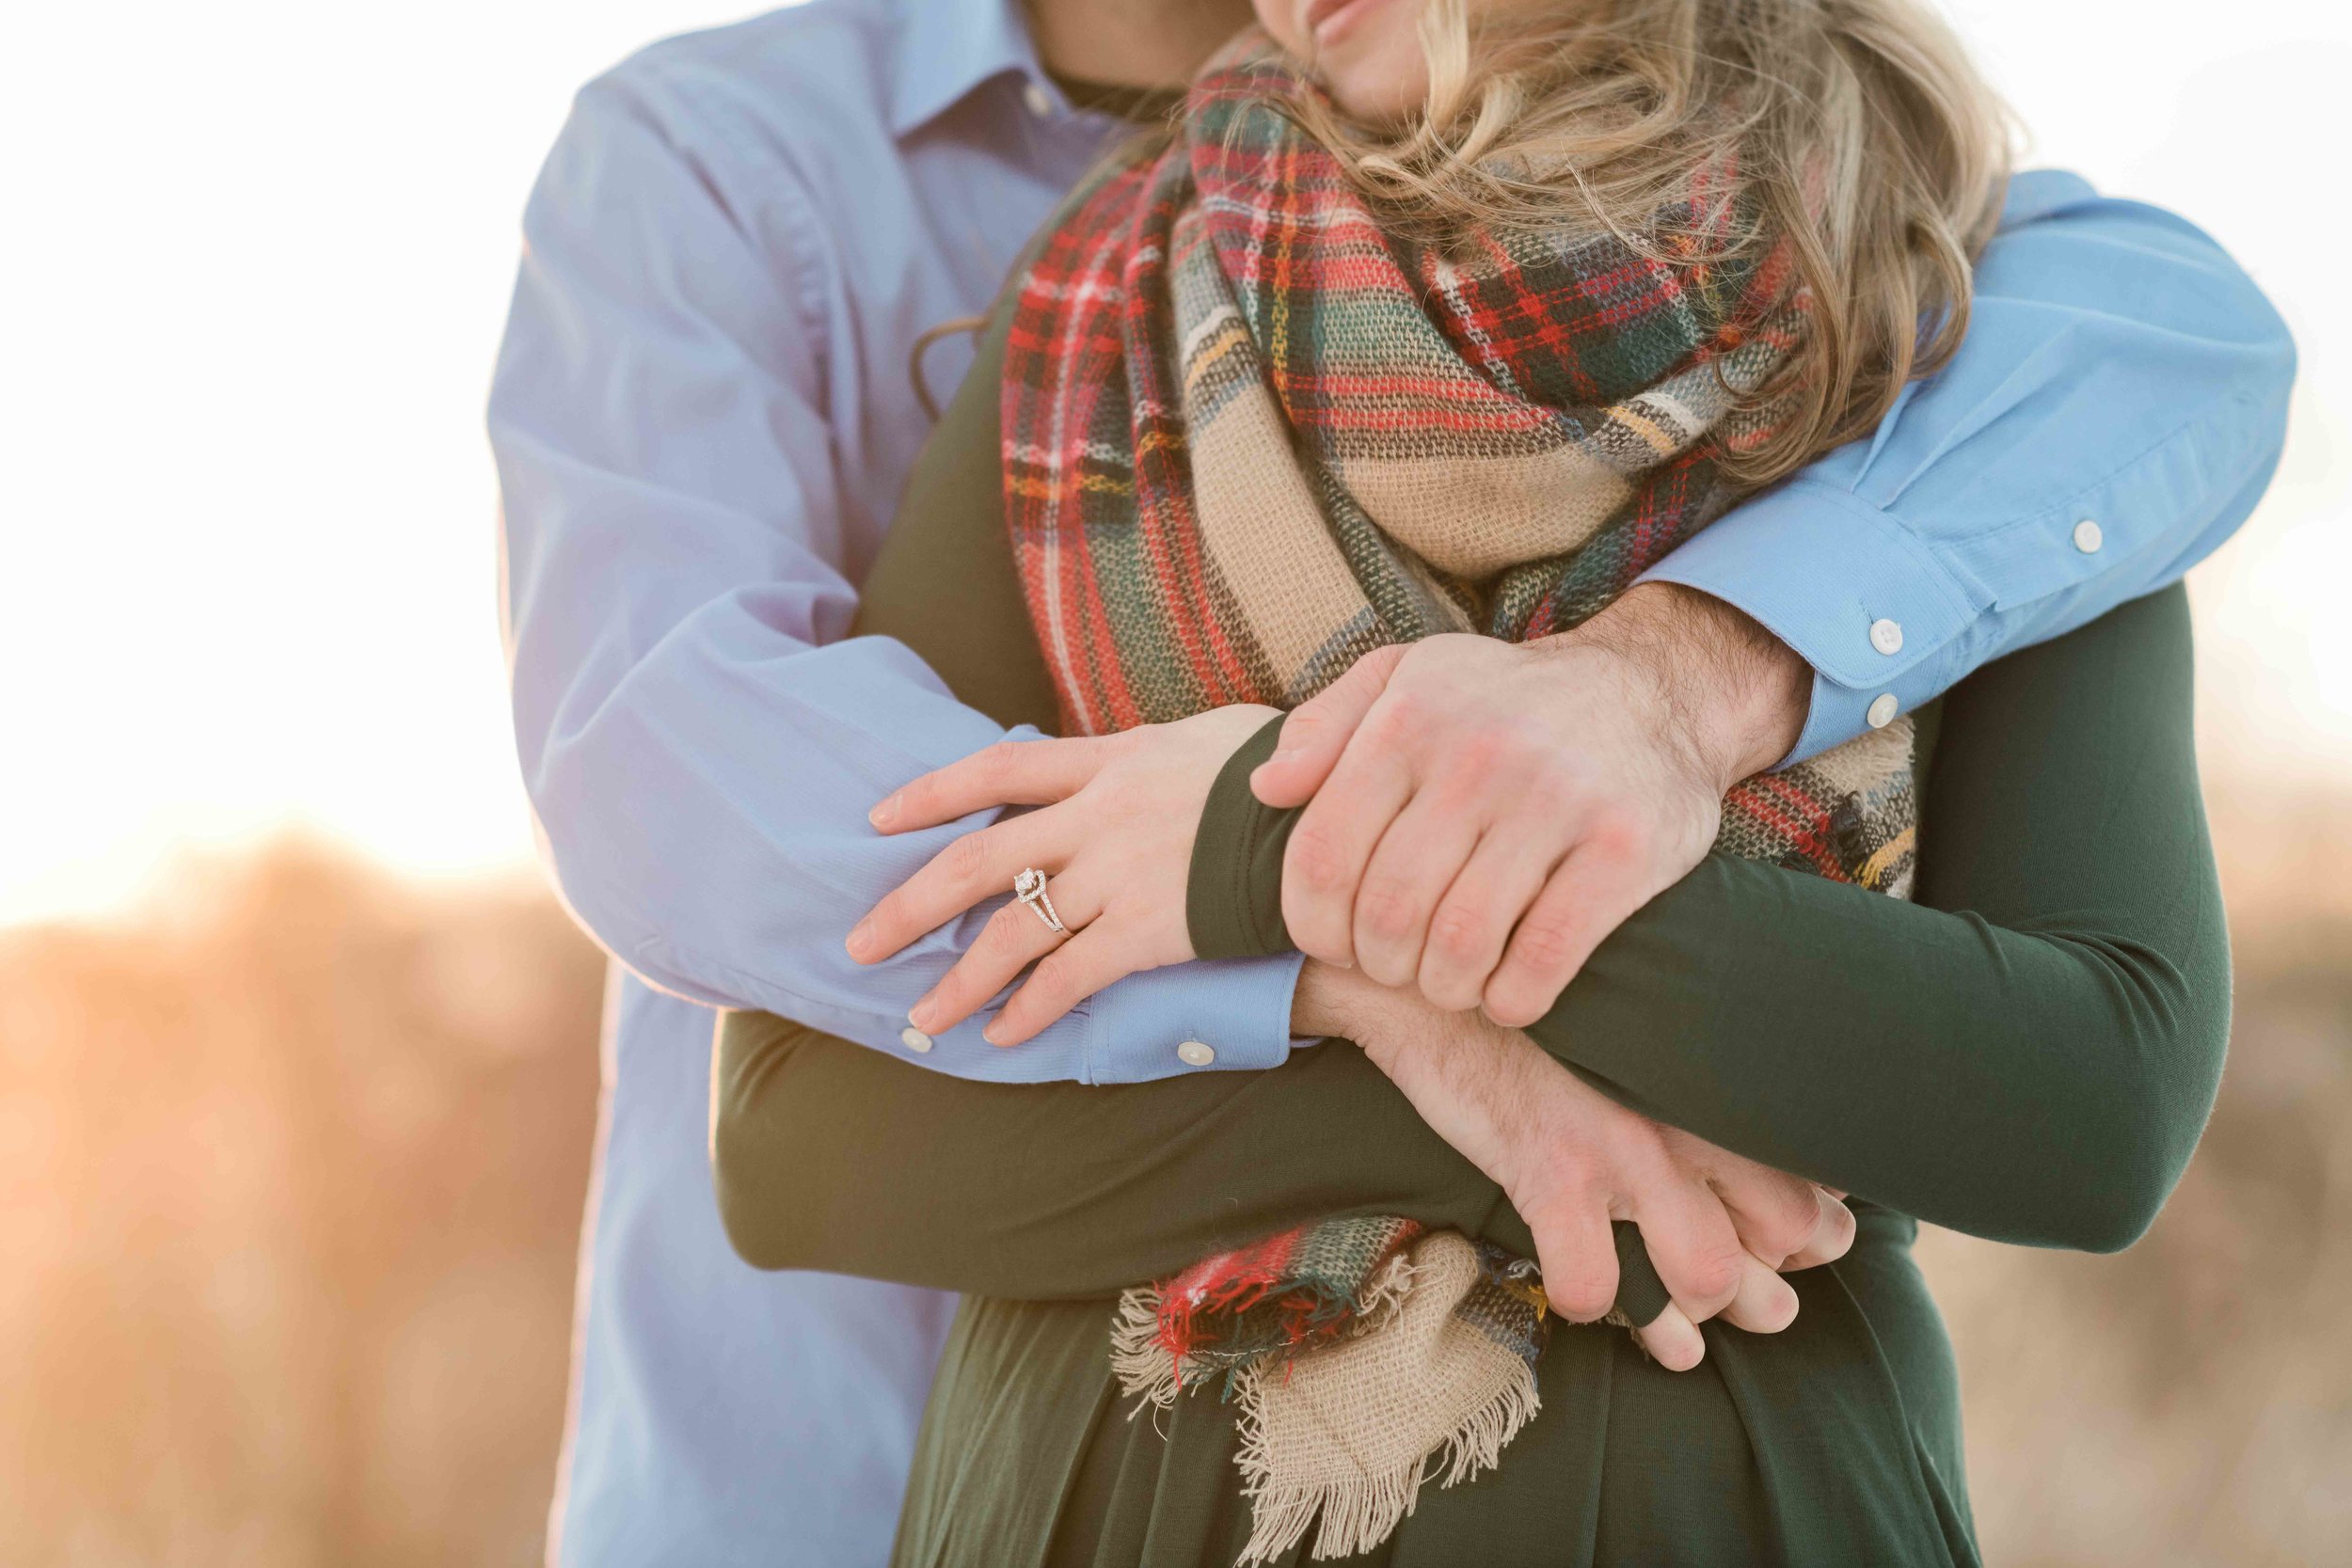 Man wraps his arms around his fiancé to warm her up